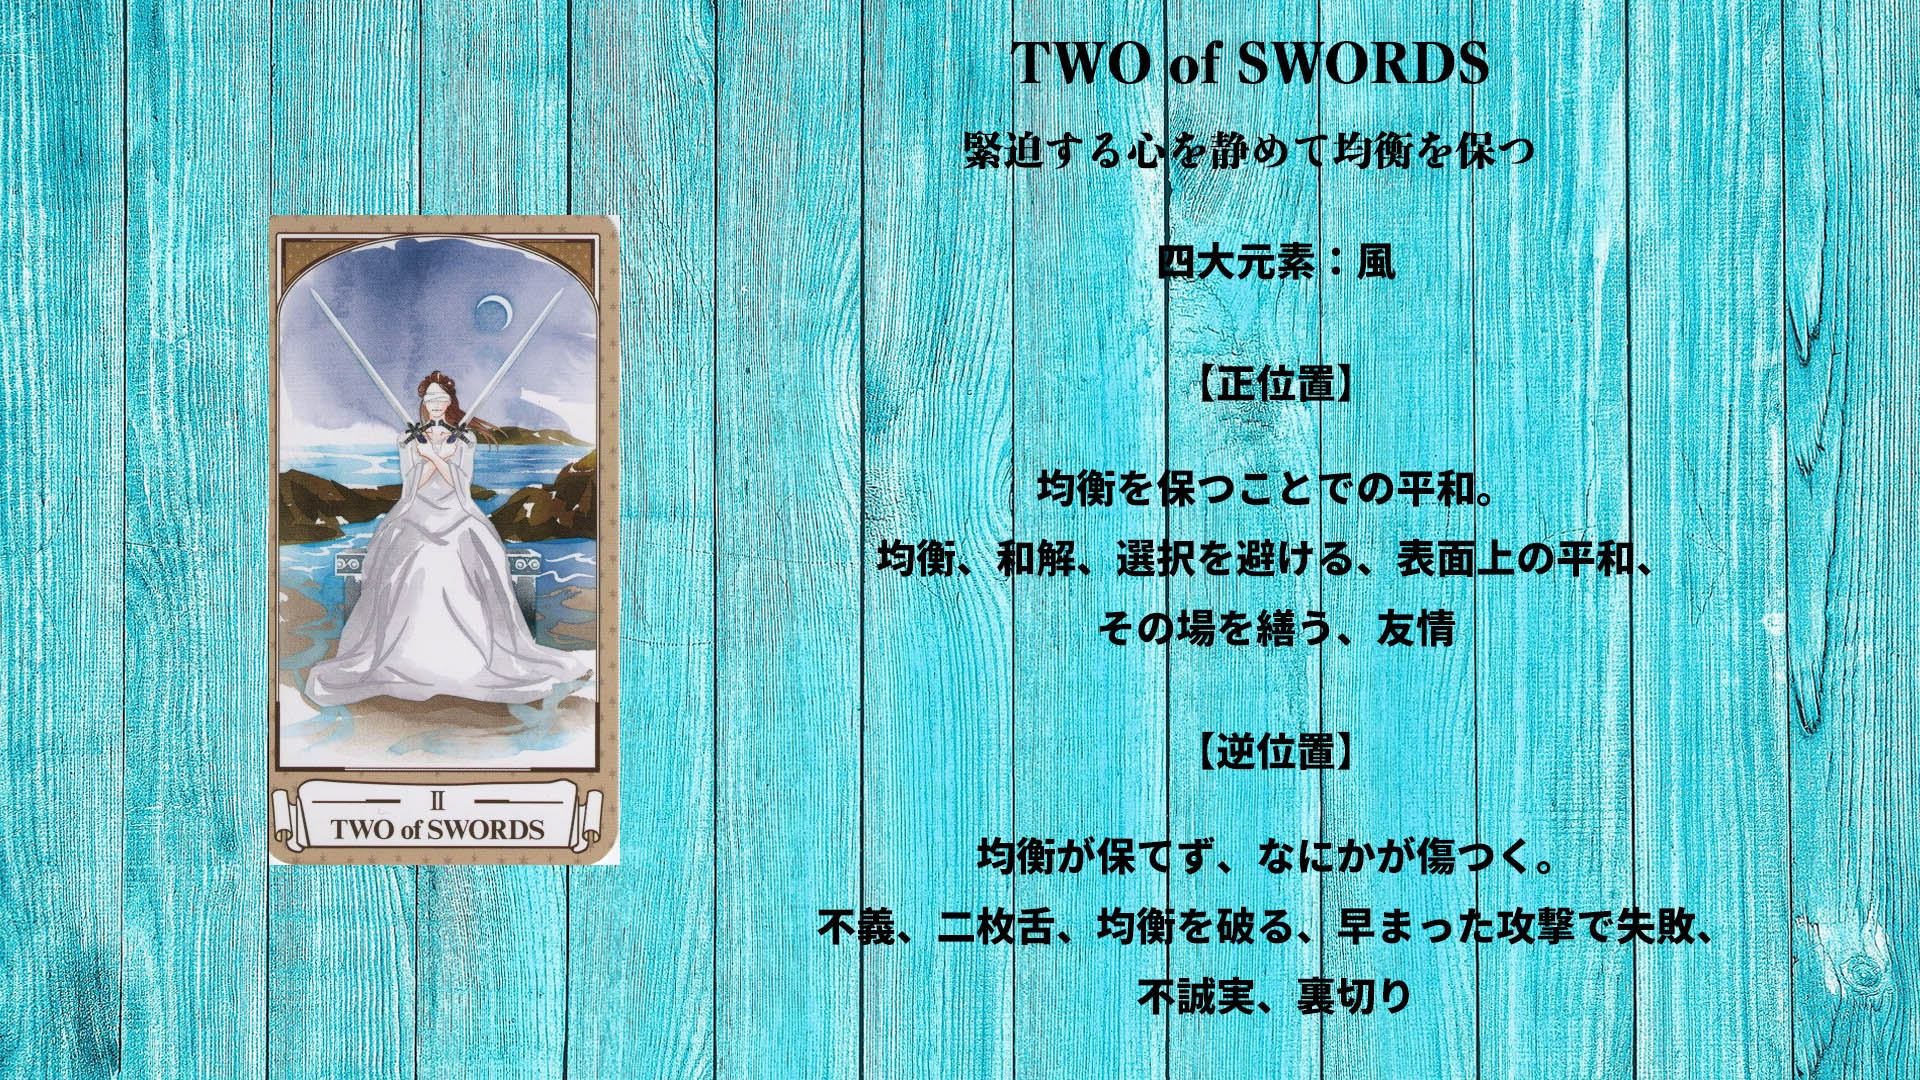 S02_TWO of SWORDS